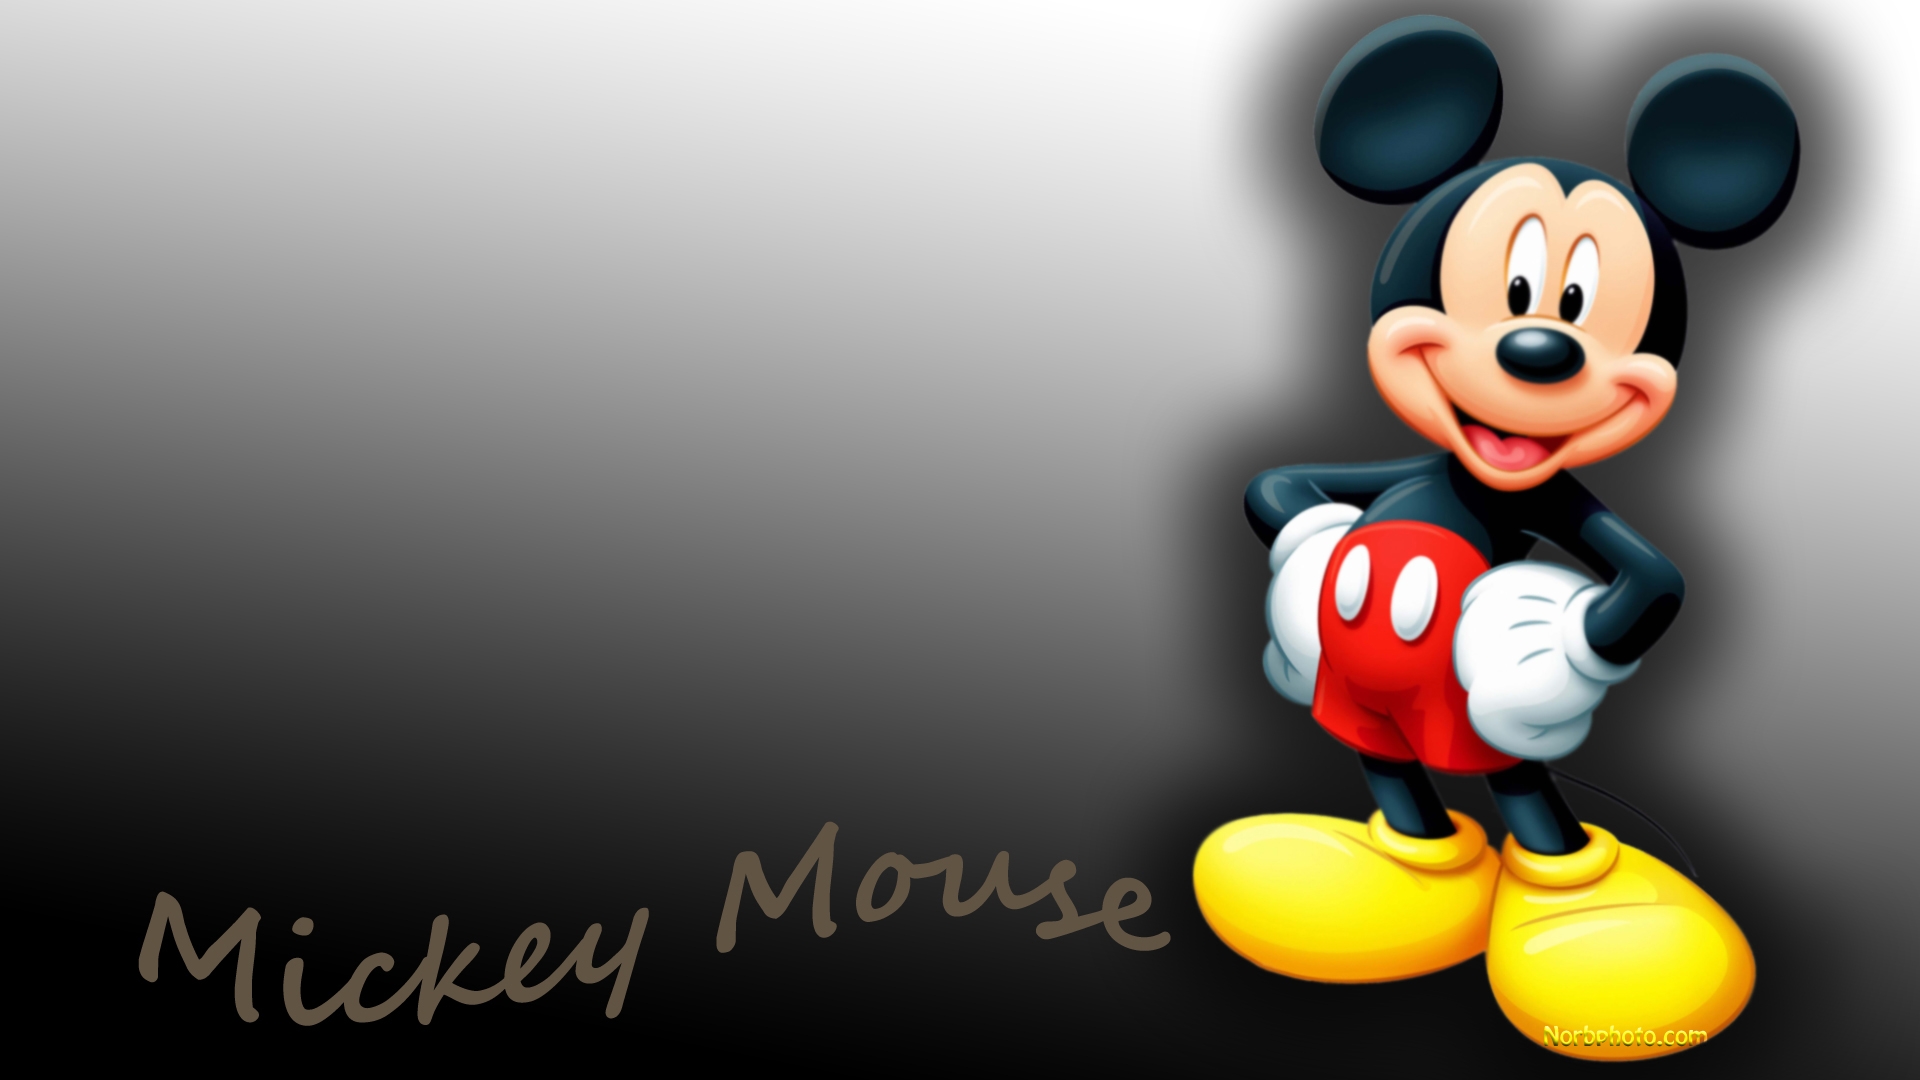 mickey mouse wallpaper download,animated cartoon,cartoon,animation,fictional character,toy